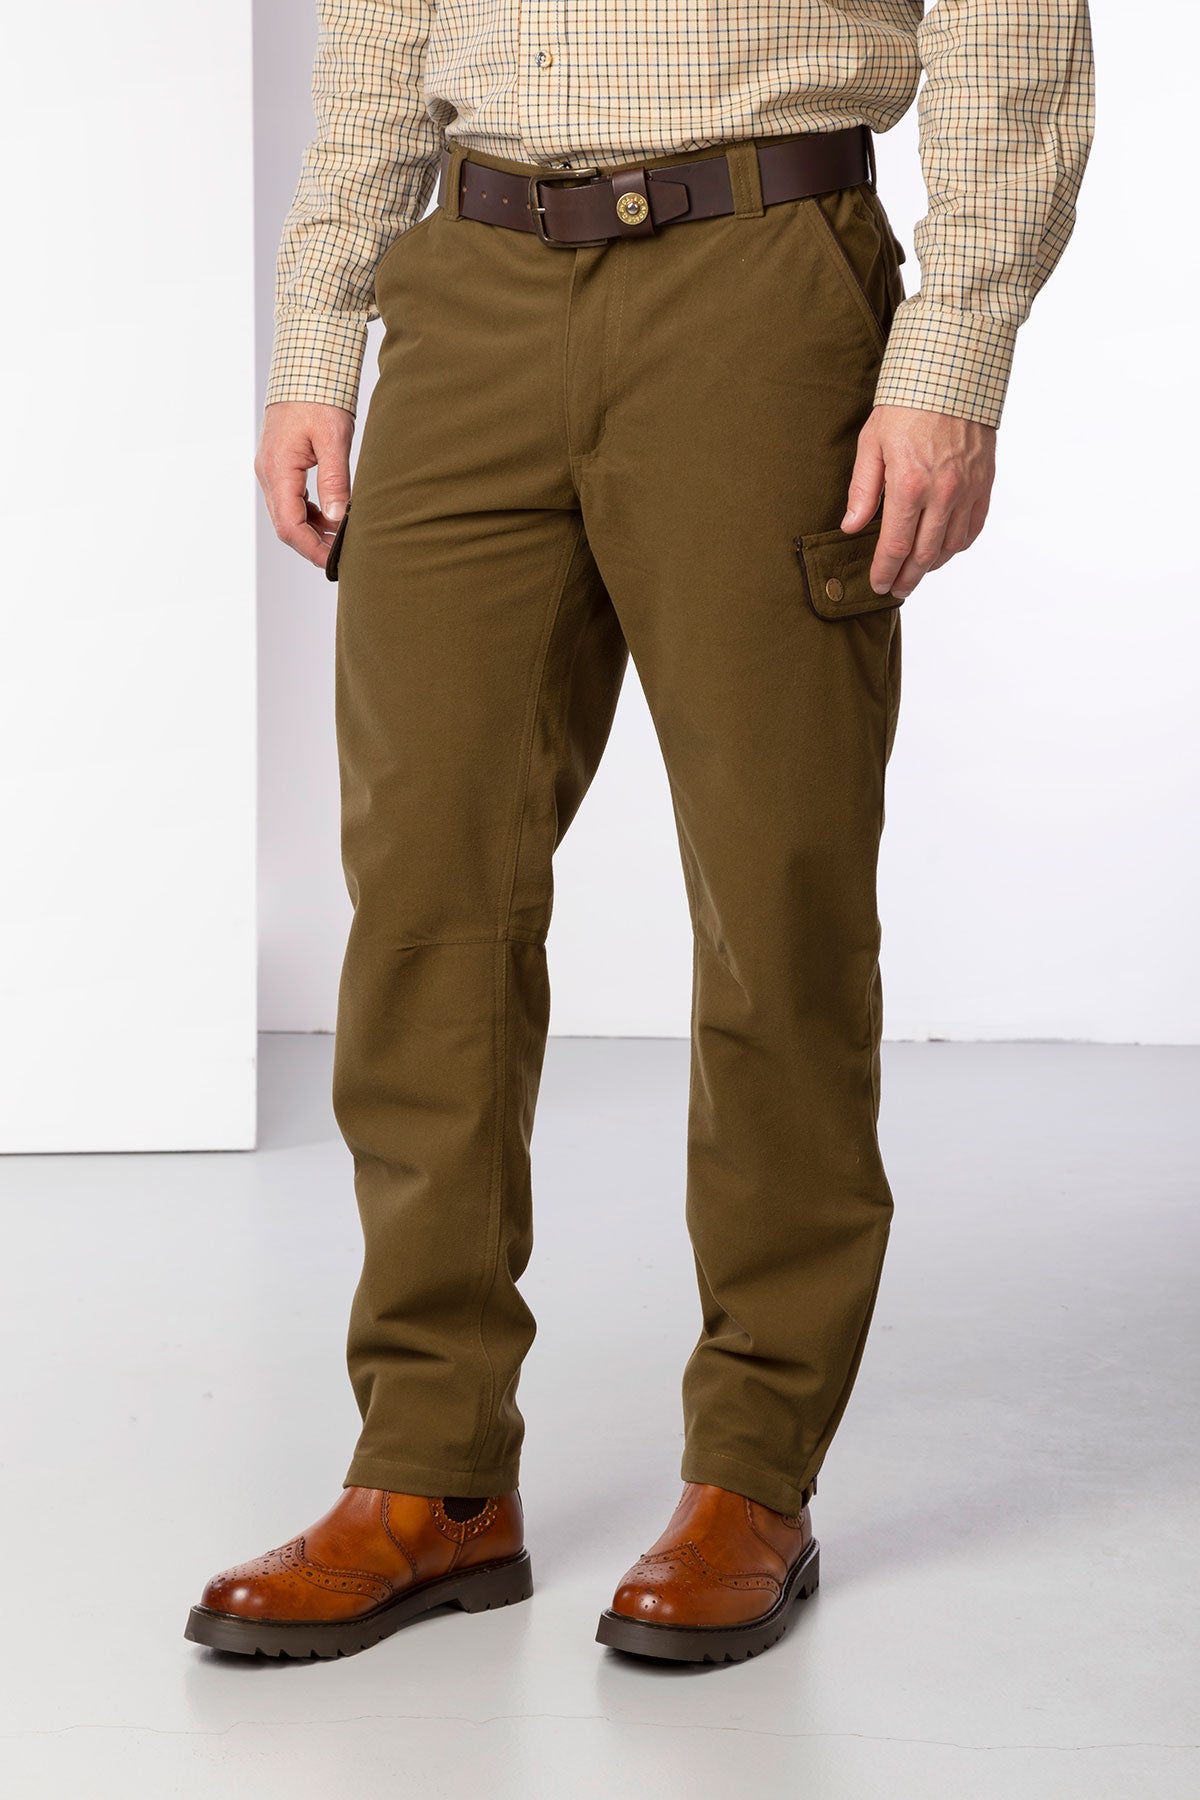 Hunting  Shooting Trousers  Ireland  Next Day Delivery  Sportsdenie